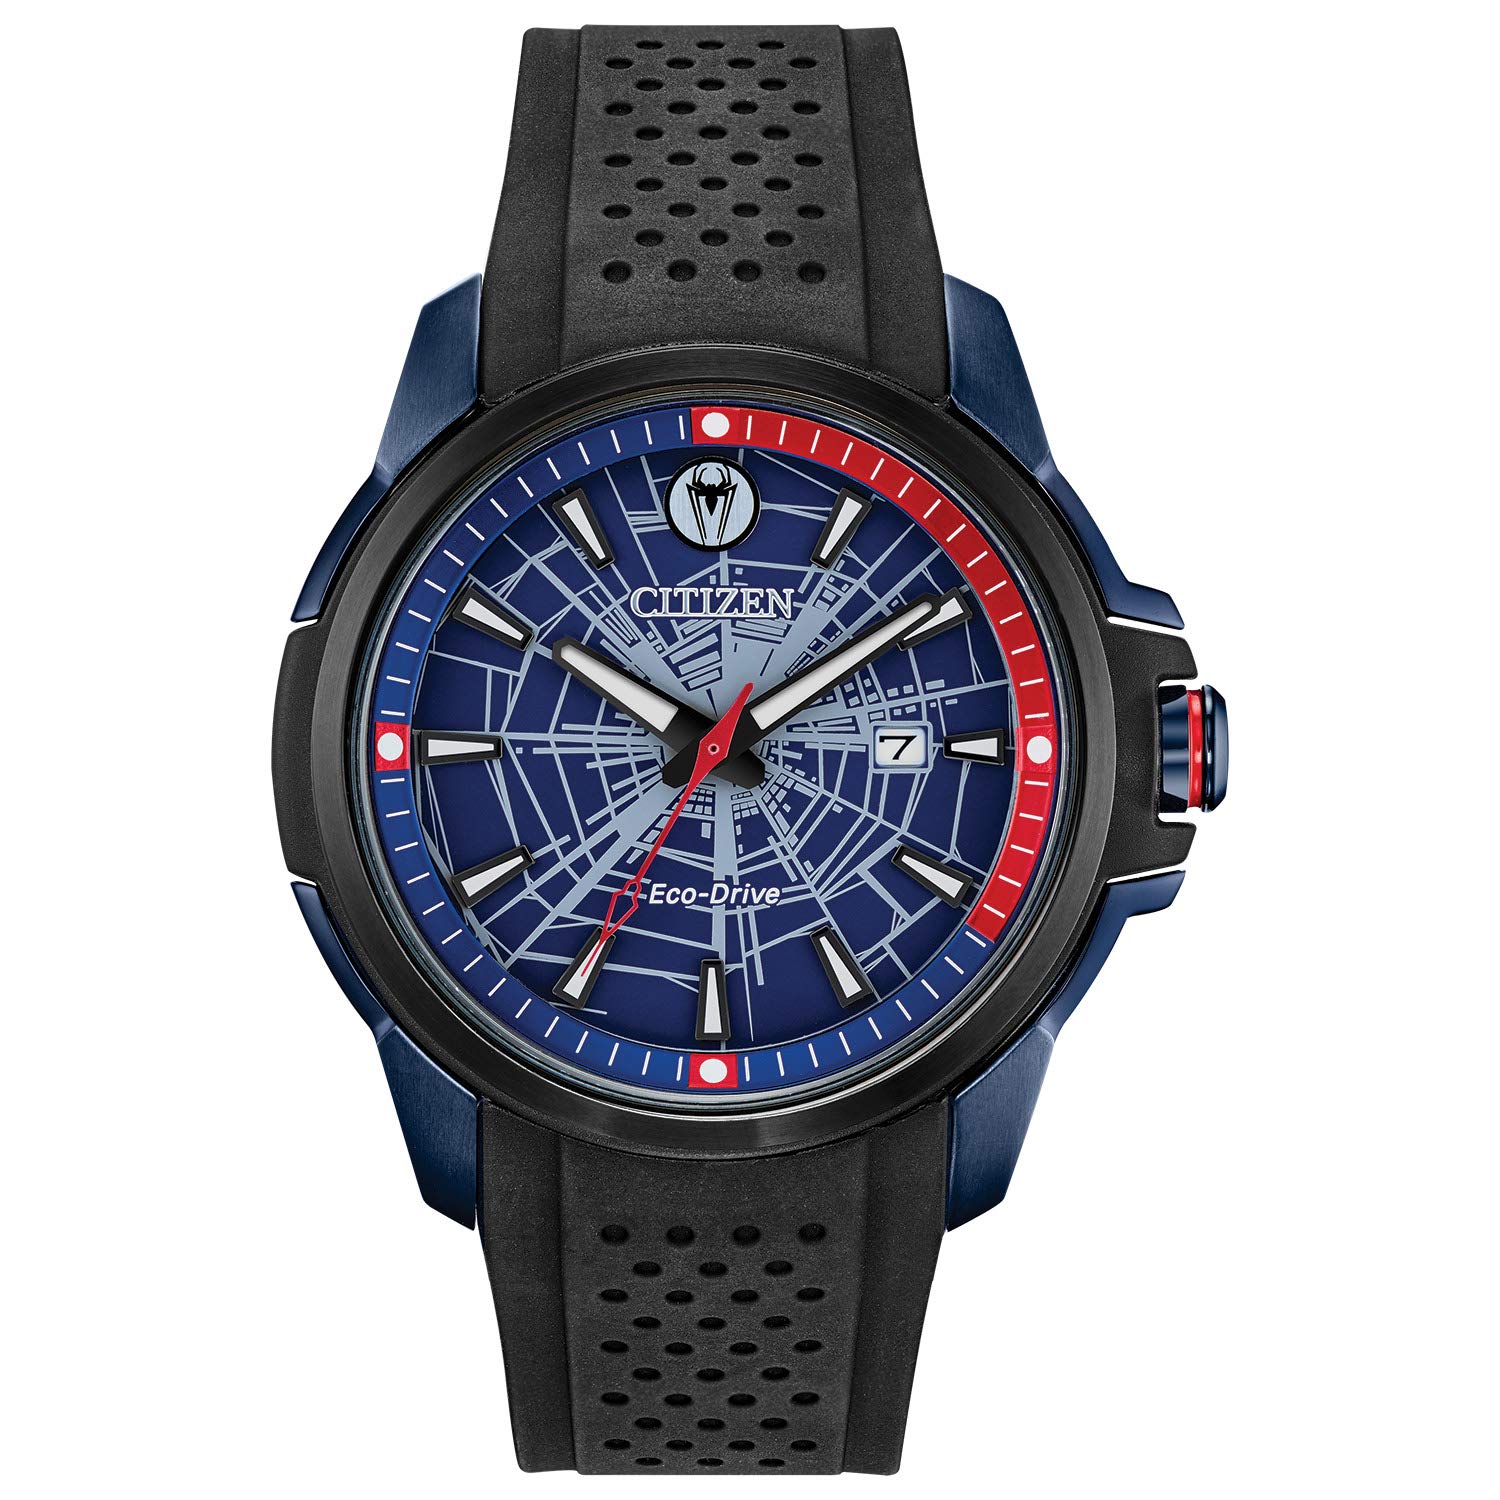 Citizen Eco-Drive Marvel Men's Watch, Stainless Steel with Polyurethane Strap, Spider-Man Black $129.99 + free shipping $129.98